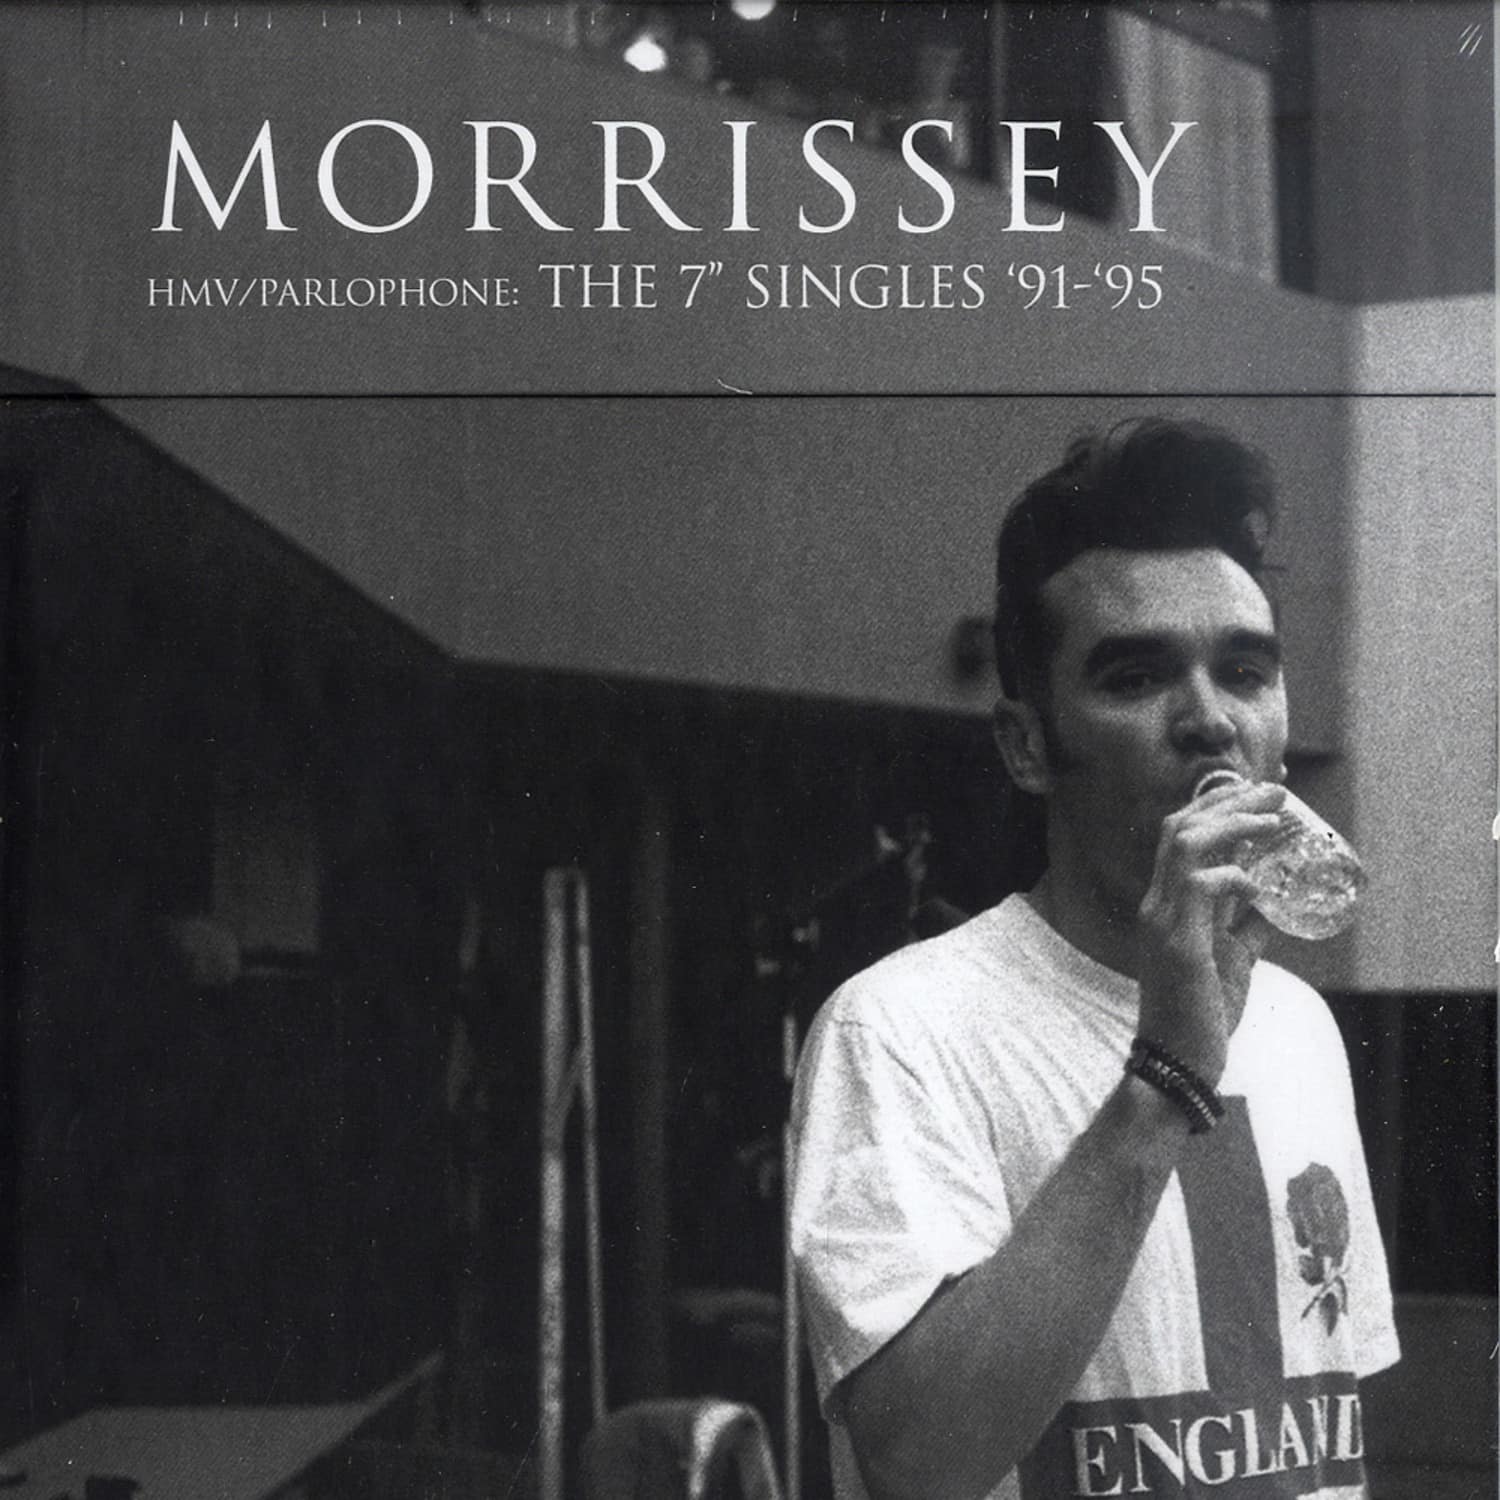 Morrissey - THE 7 INCH SINGLES 91 - 95 